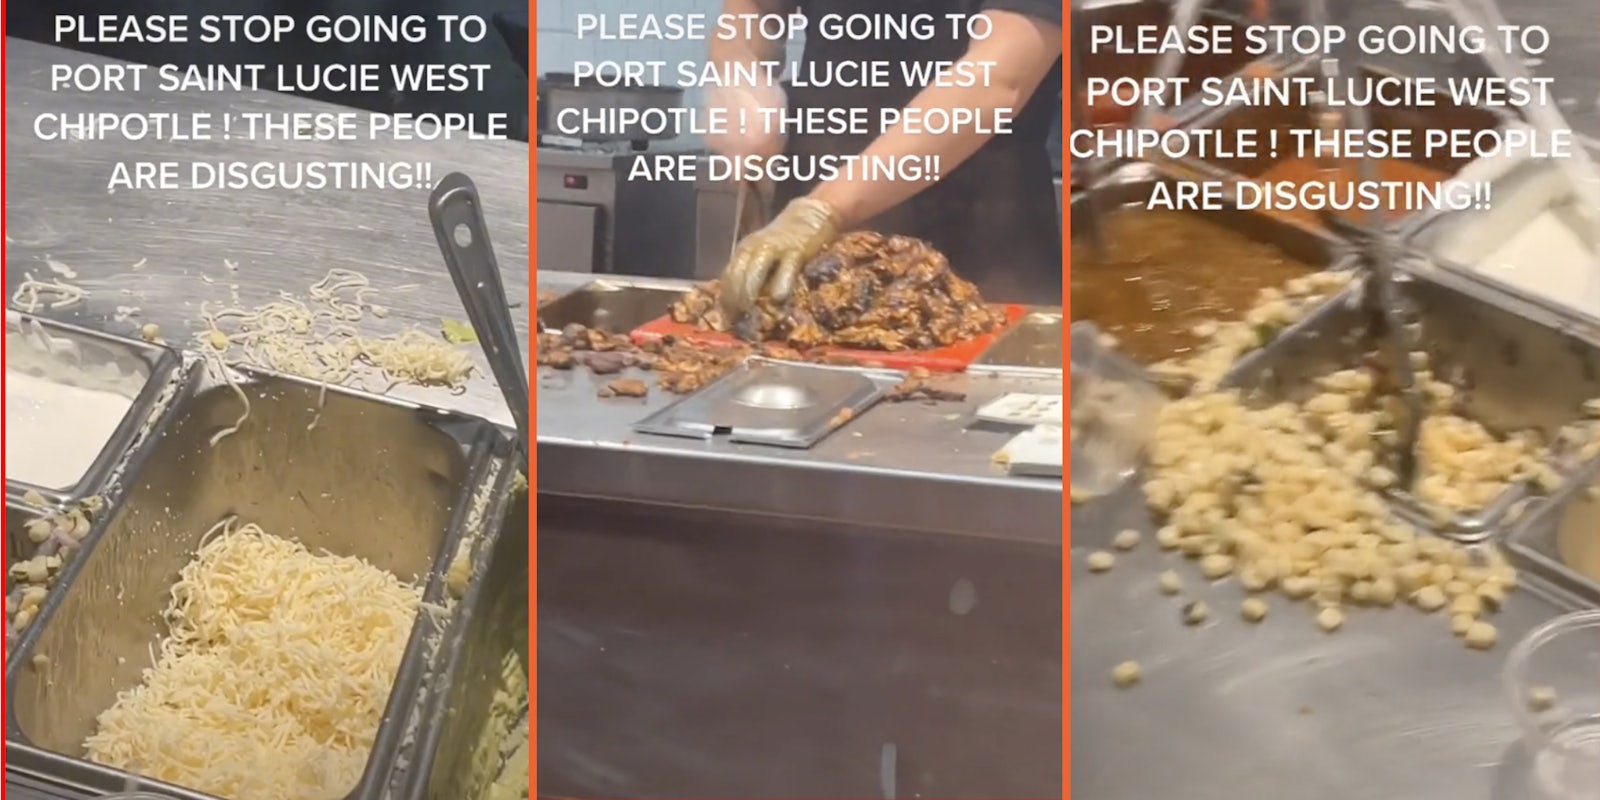 Man criticizes cleanliness of Chipotle in viral TikTok, shows spilled ingredients and employee cutting a large amount of meat.